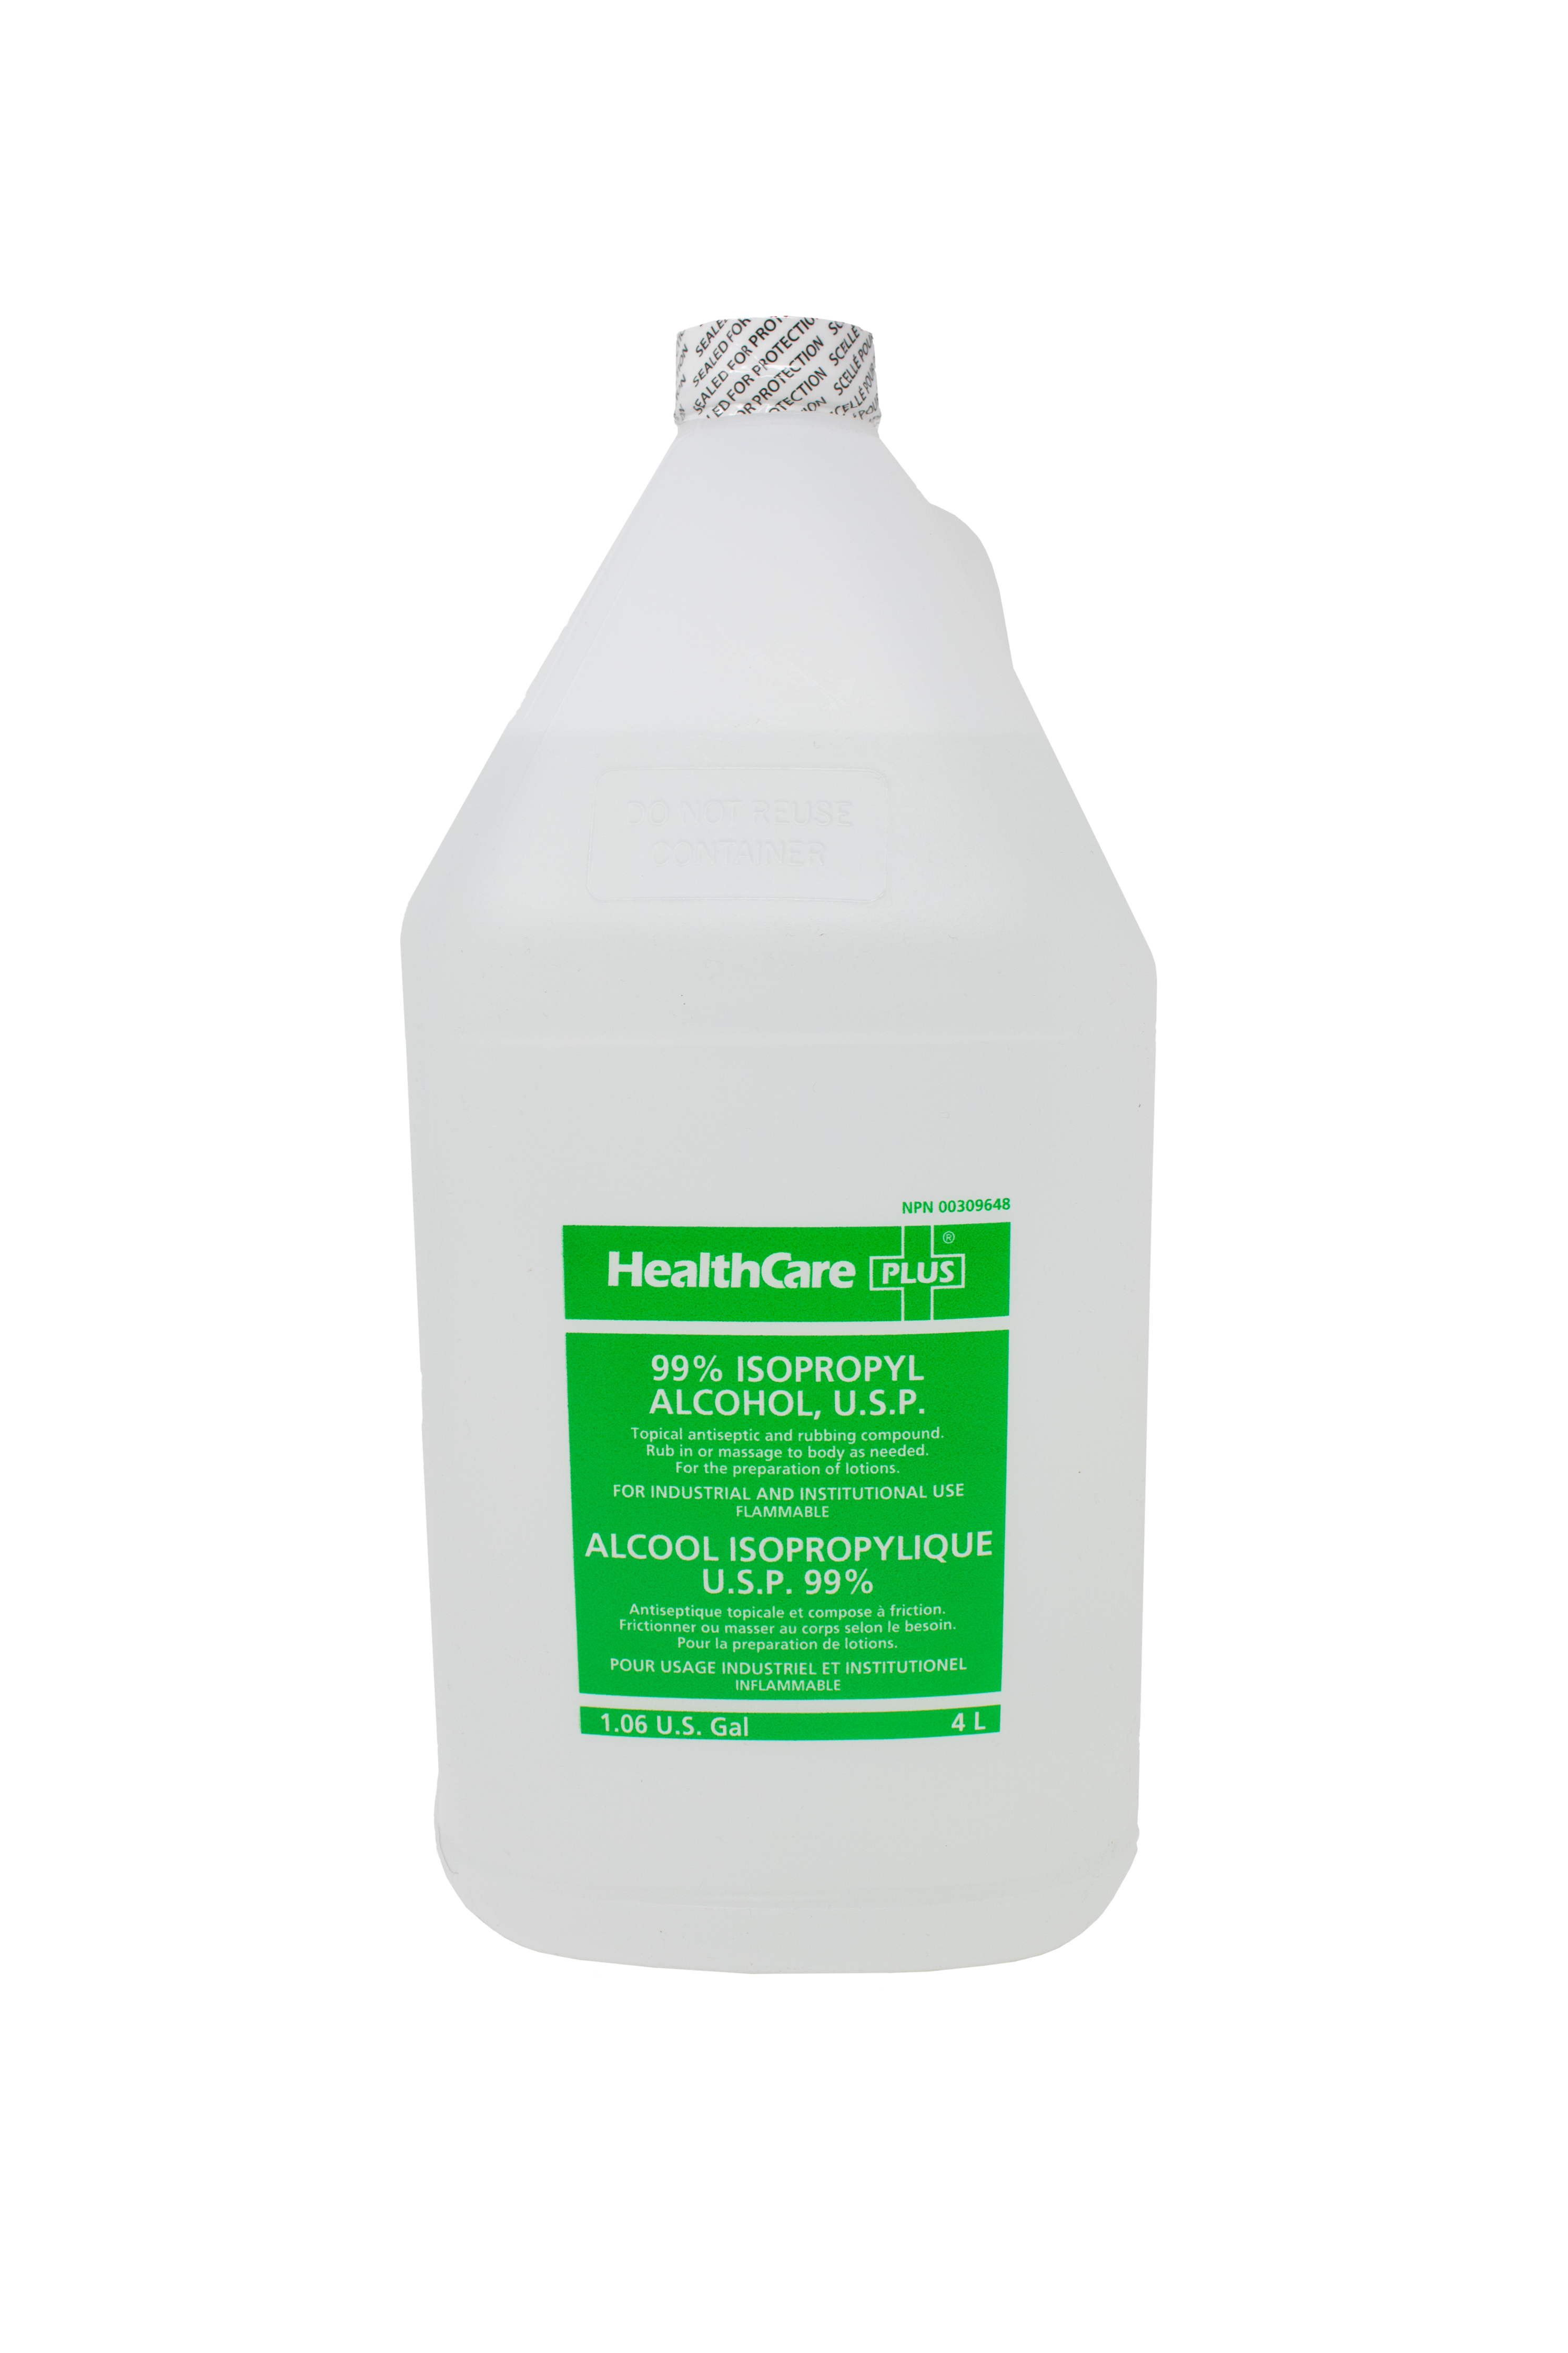 HealthCare Plus Isopropyl Alcohol 99% U.S.P. 4L Bottle – Great Lakes Supply